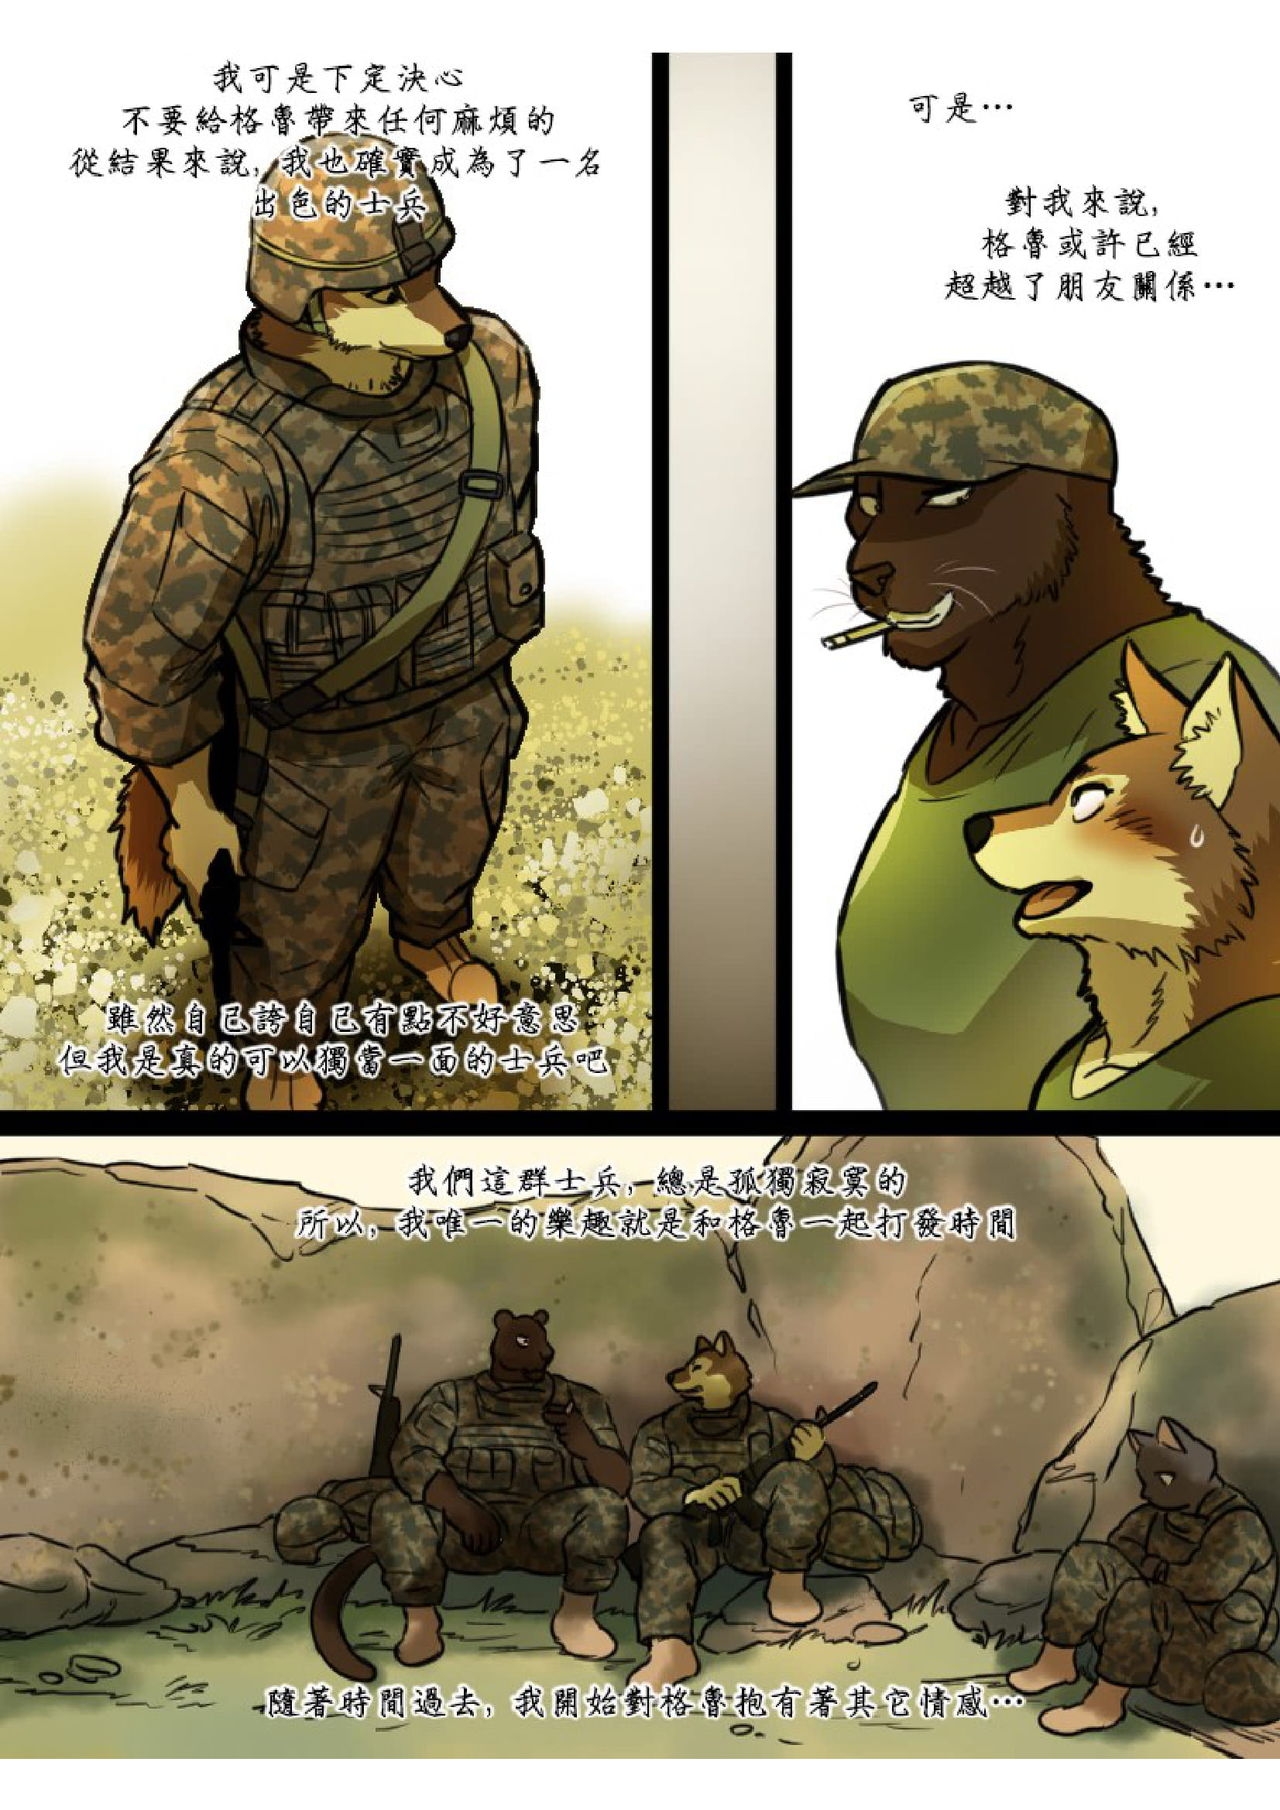 [Maririn] Brothers In Arms [Chinese] 7